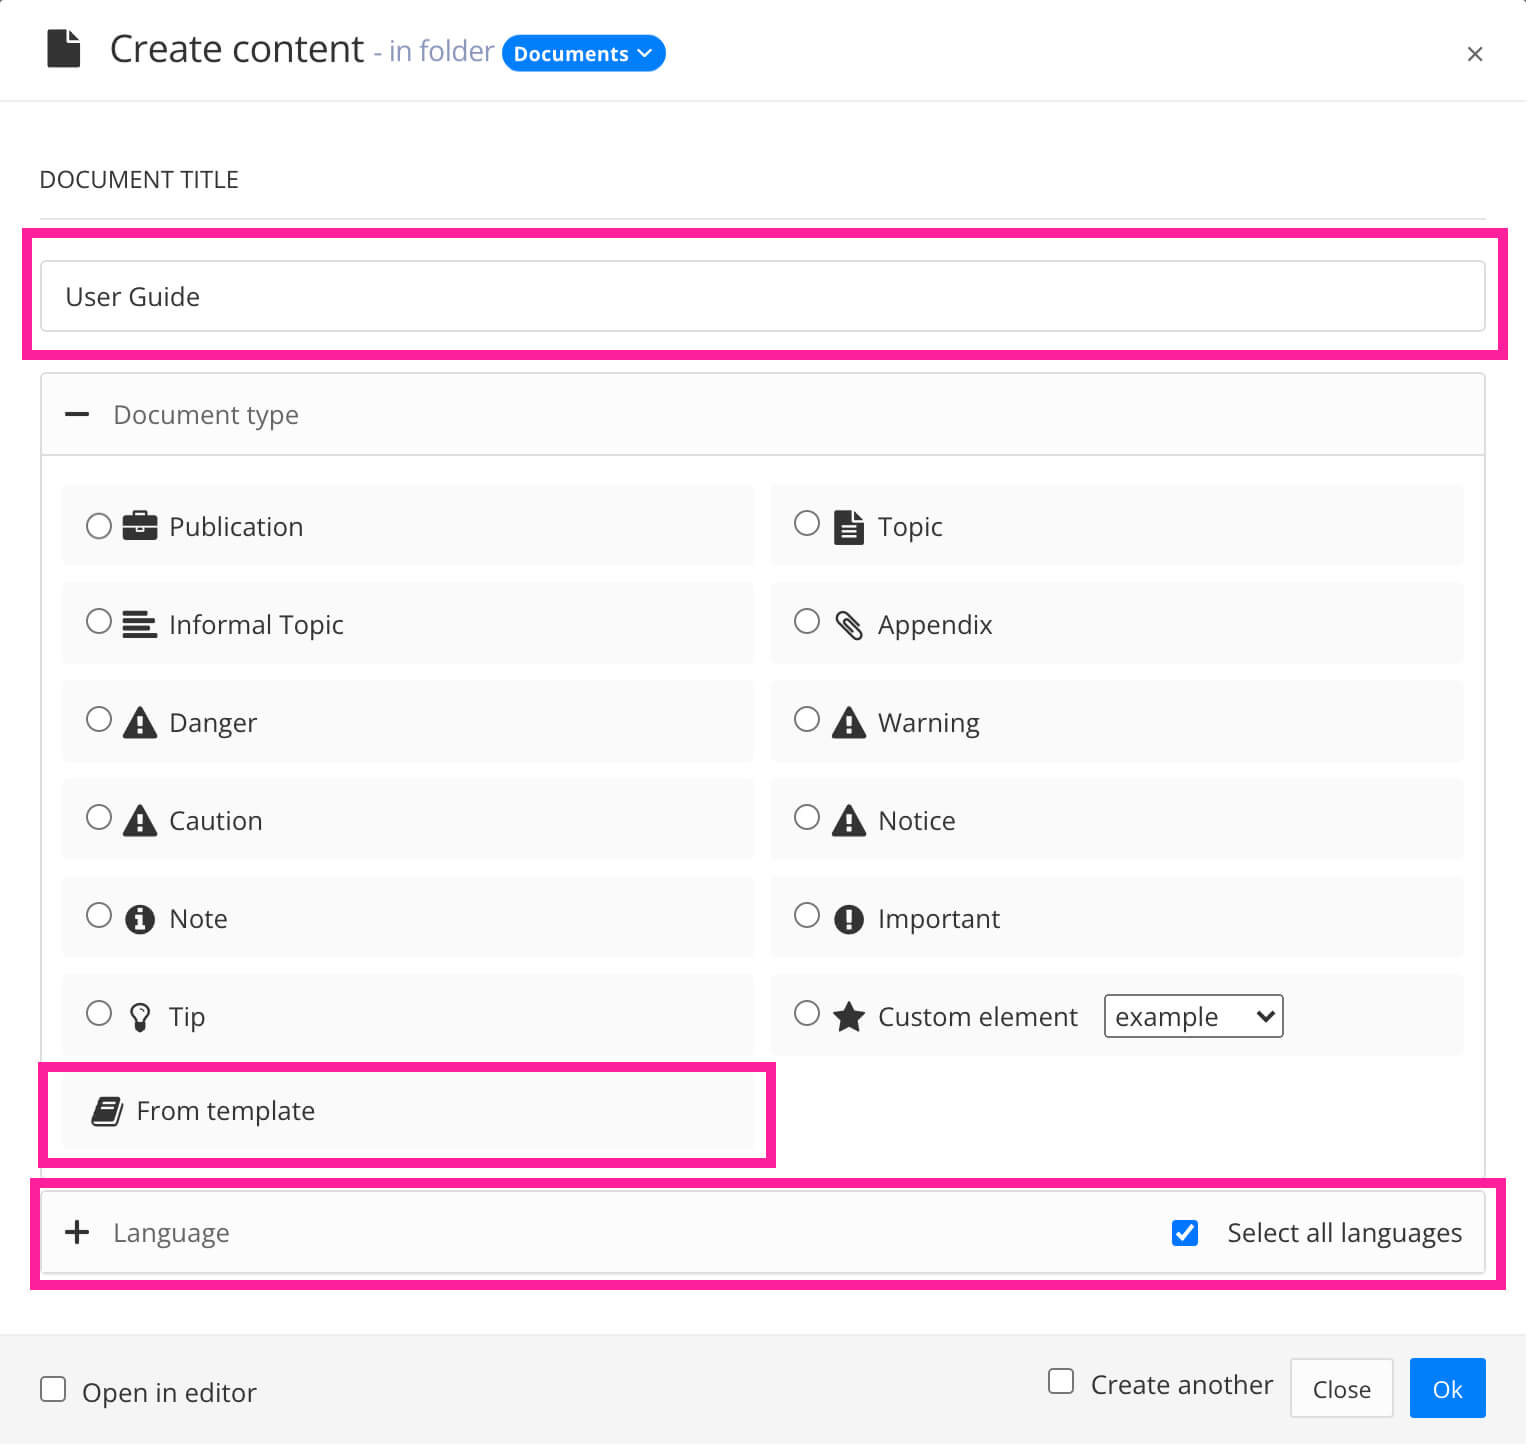 Create content dialog for new publication based on template. A name is entered, From template is selected, and select all languages is checked.